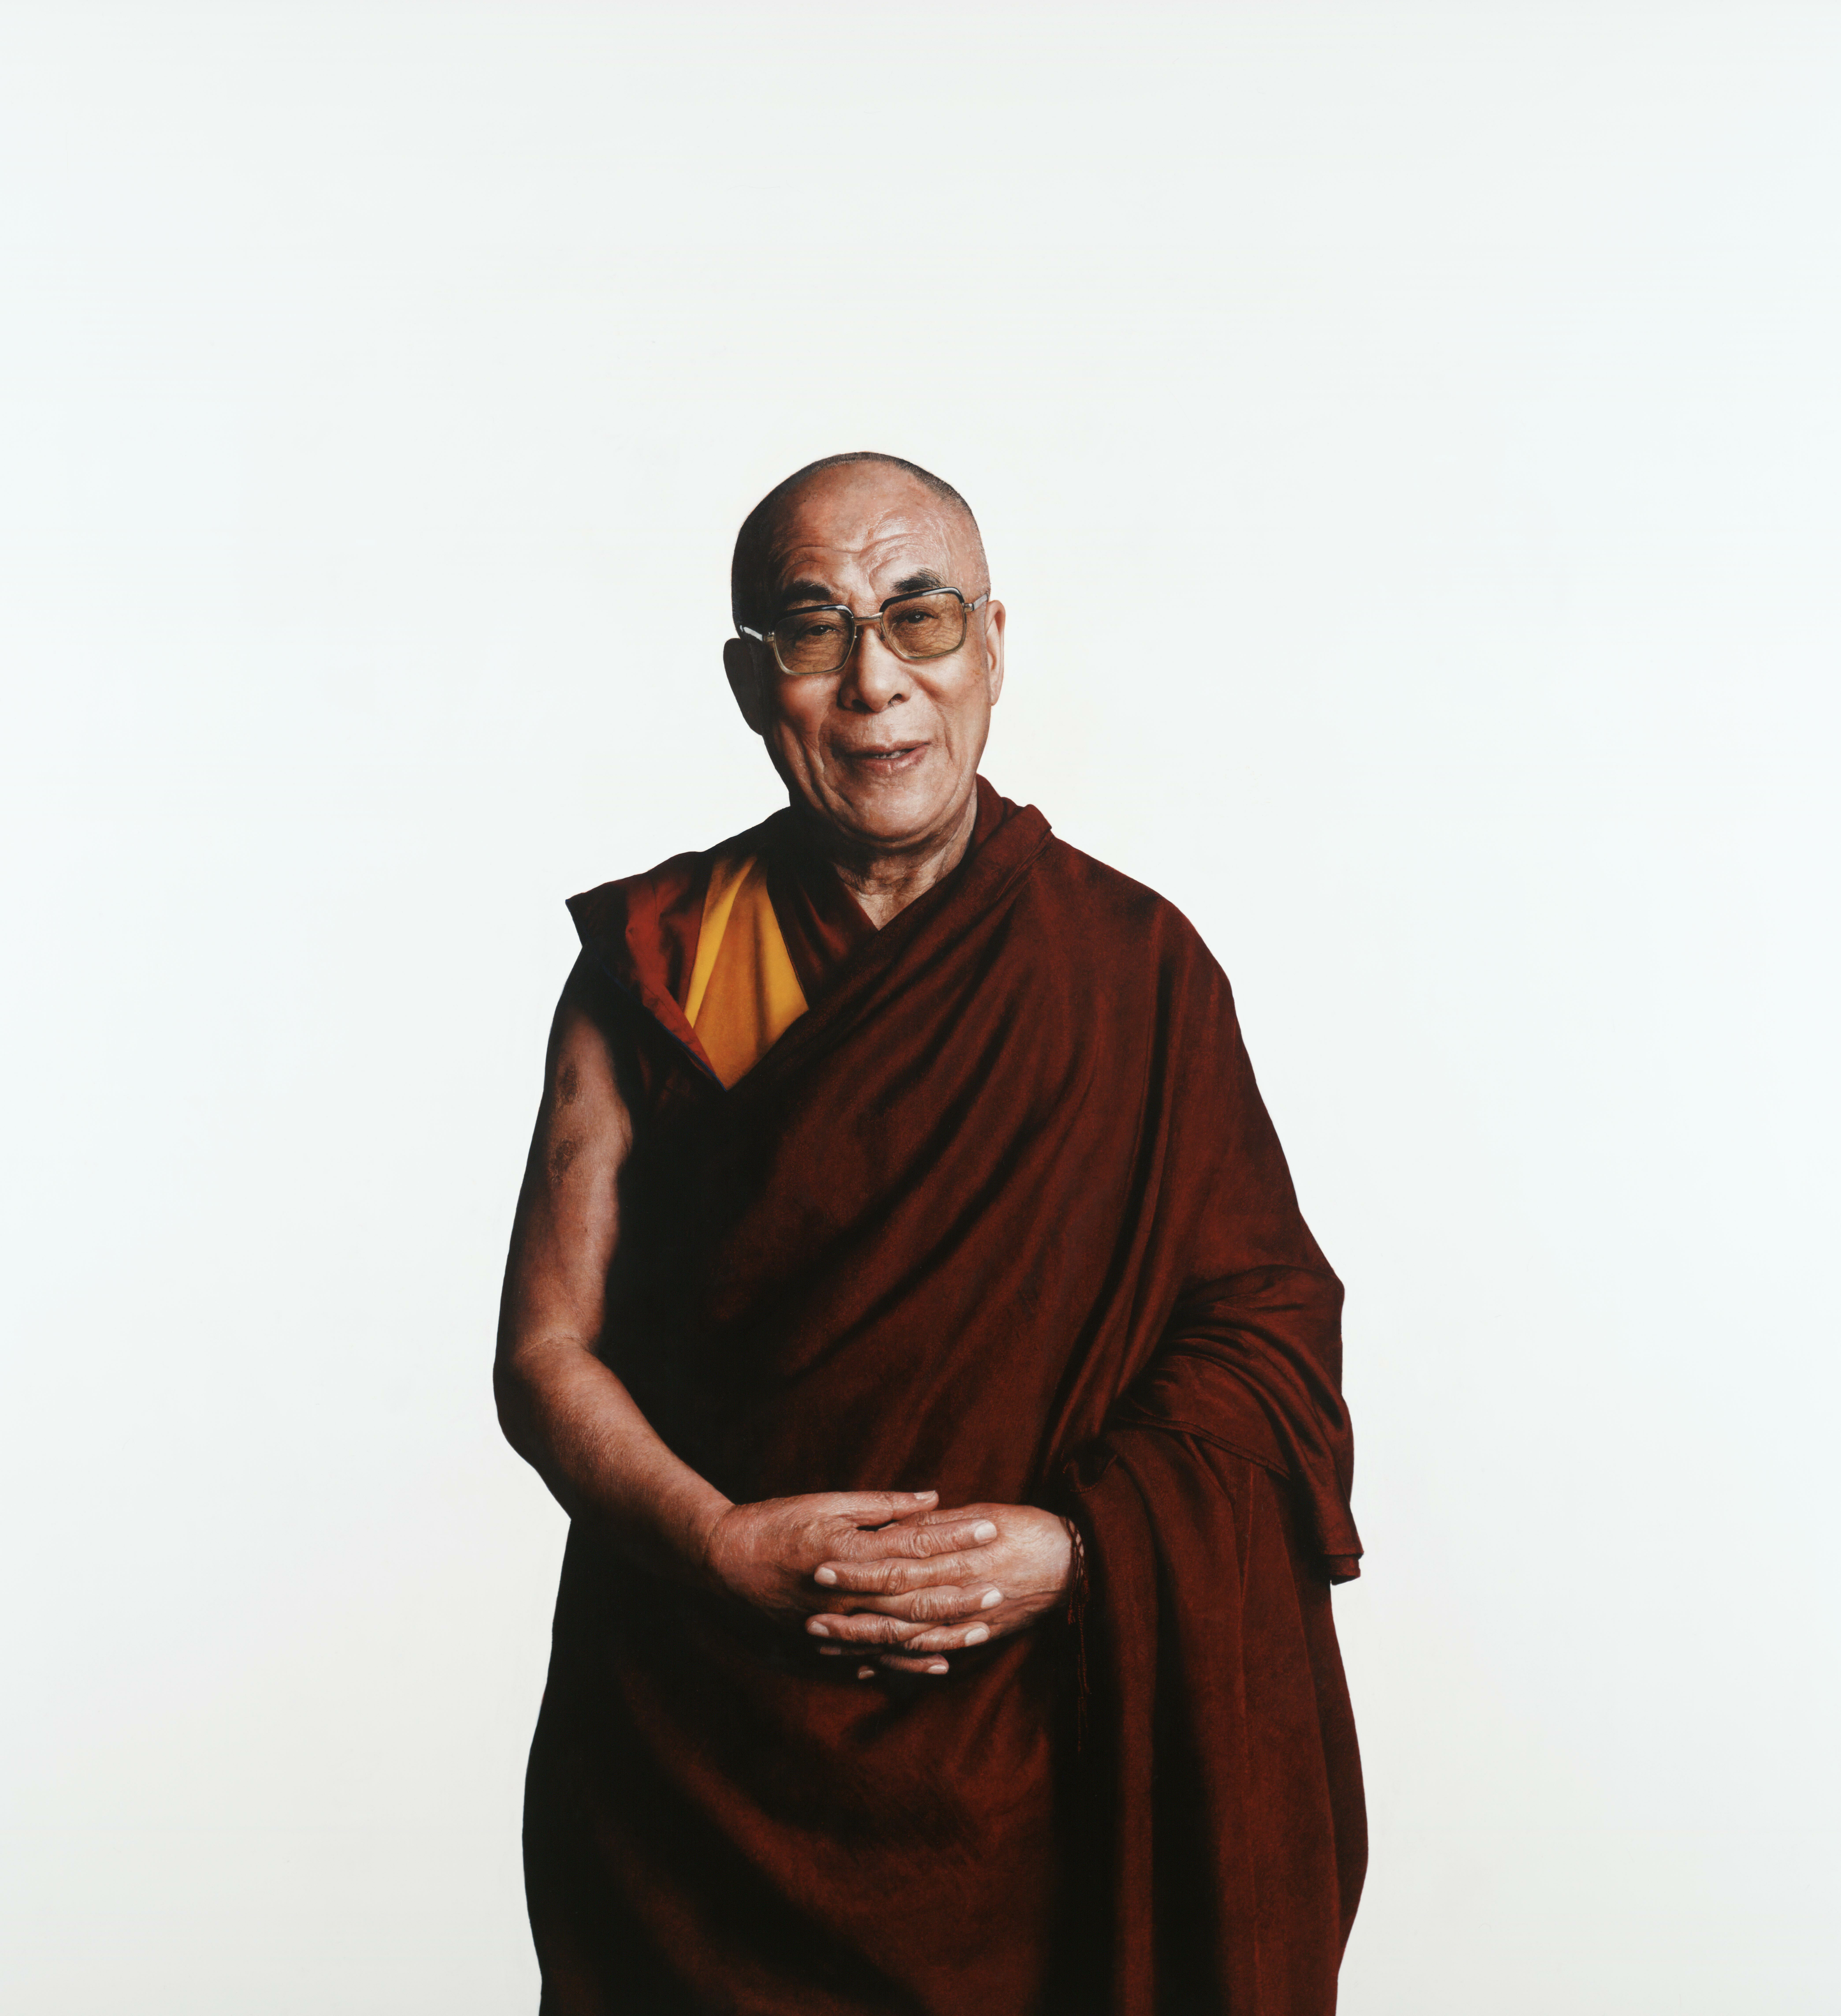 <p>This oil-on-canvas portrait of the 14th Dalai Lama, Tenzin Gyatso, was painted by Robert McCurdy in 2008.</p>
